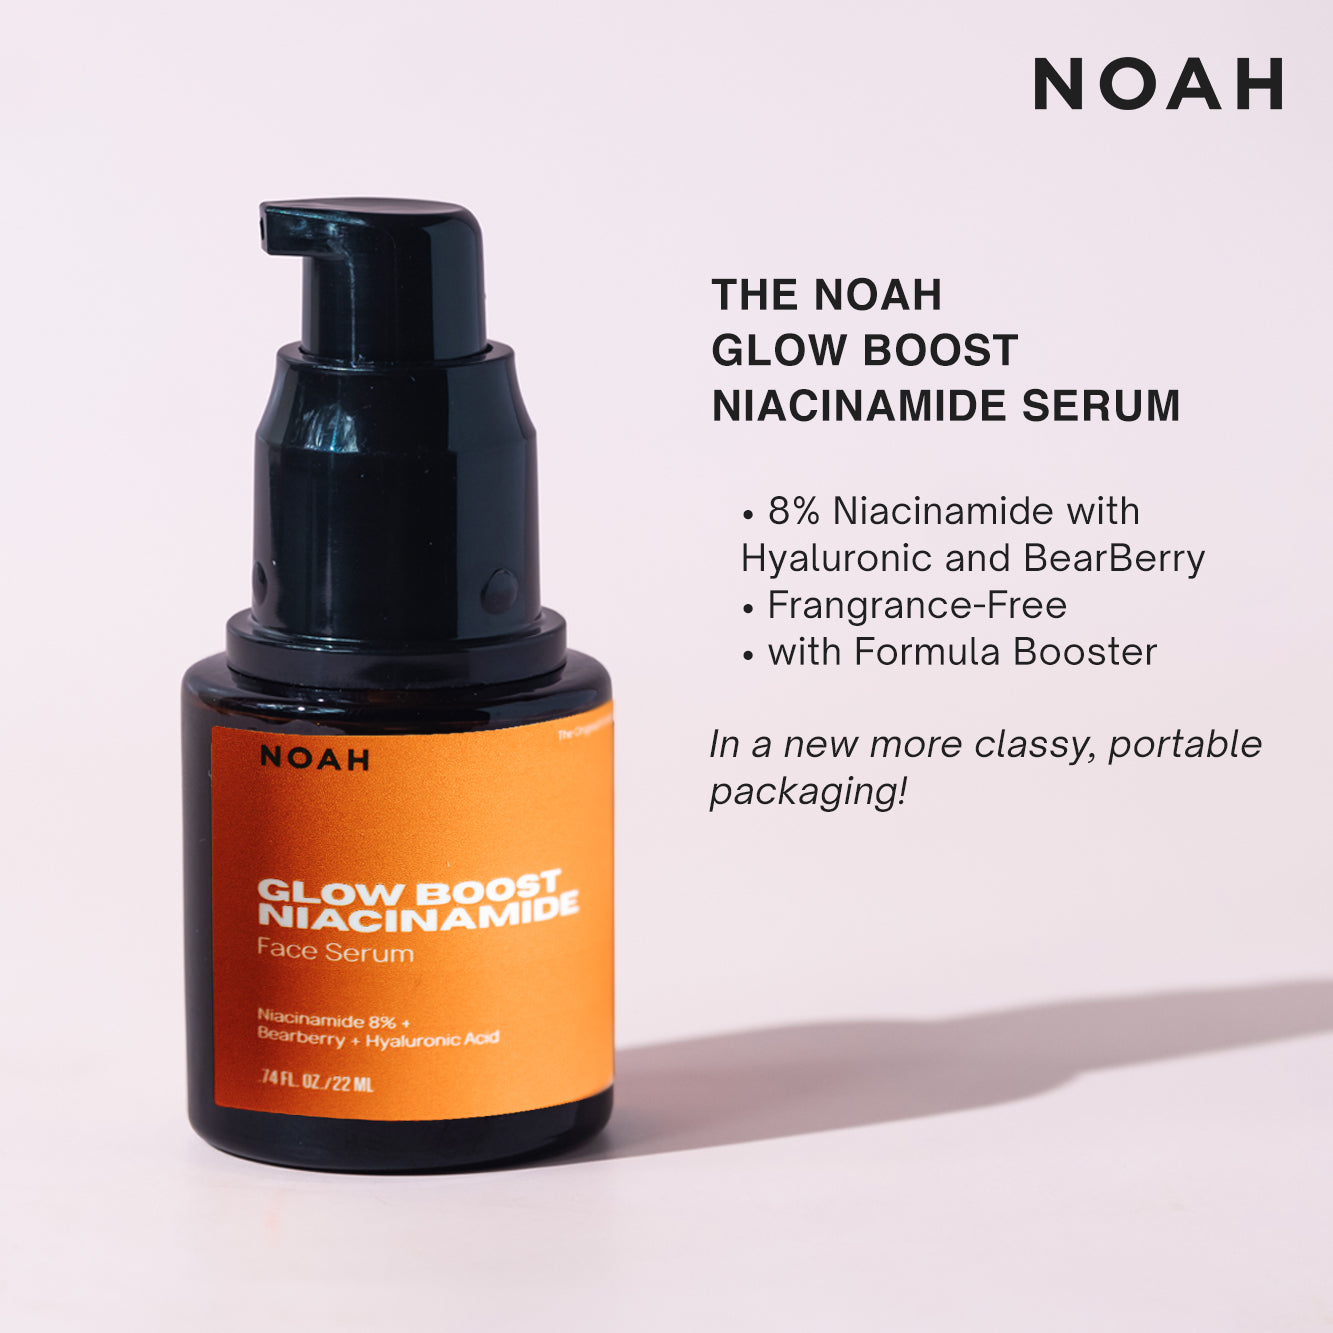 Noah Glow Boost Niacinamide Face Serum 22mL with Formula Booster (Works faster to control oil, acne, increase radiance and improve pore size)